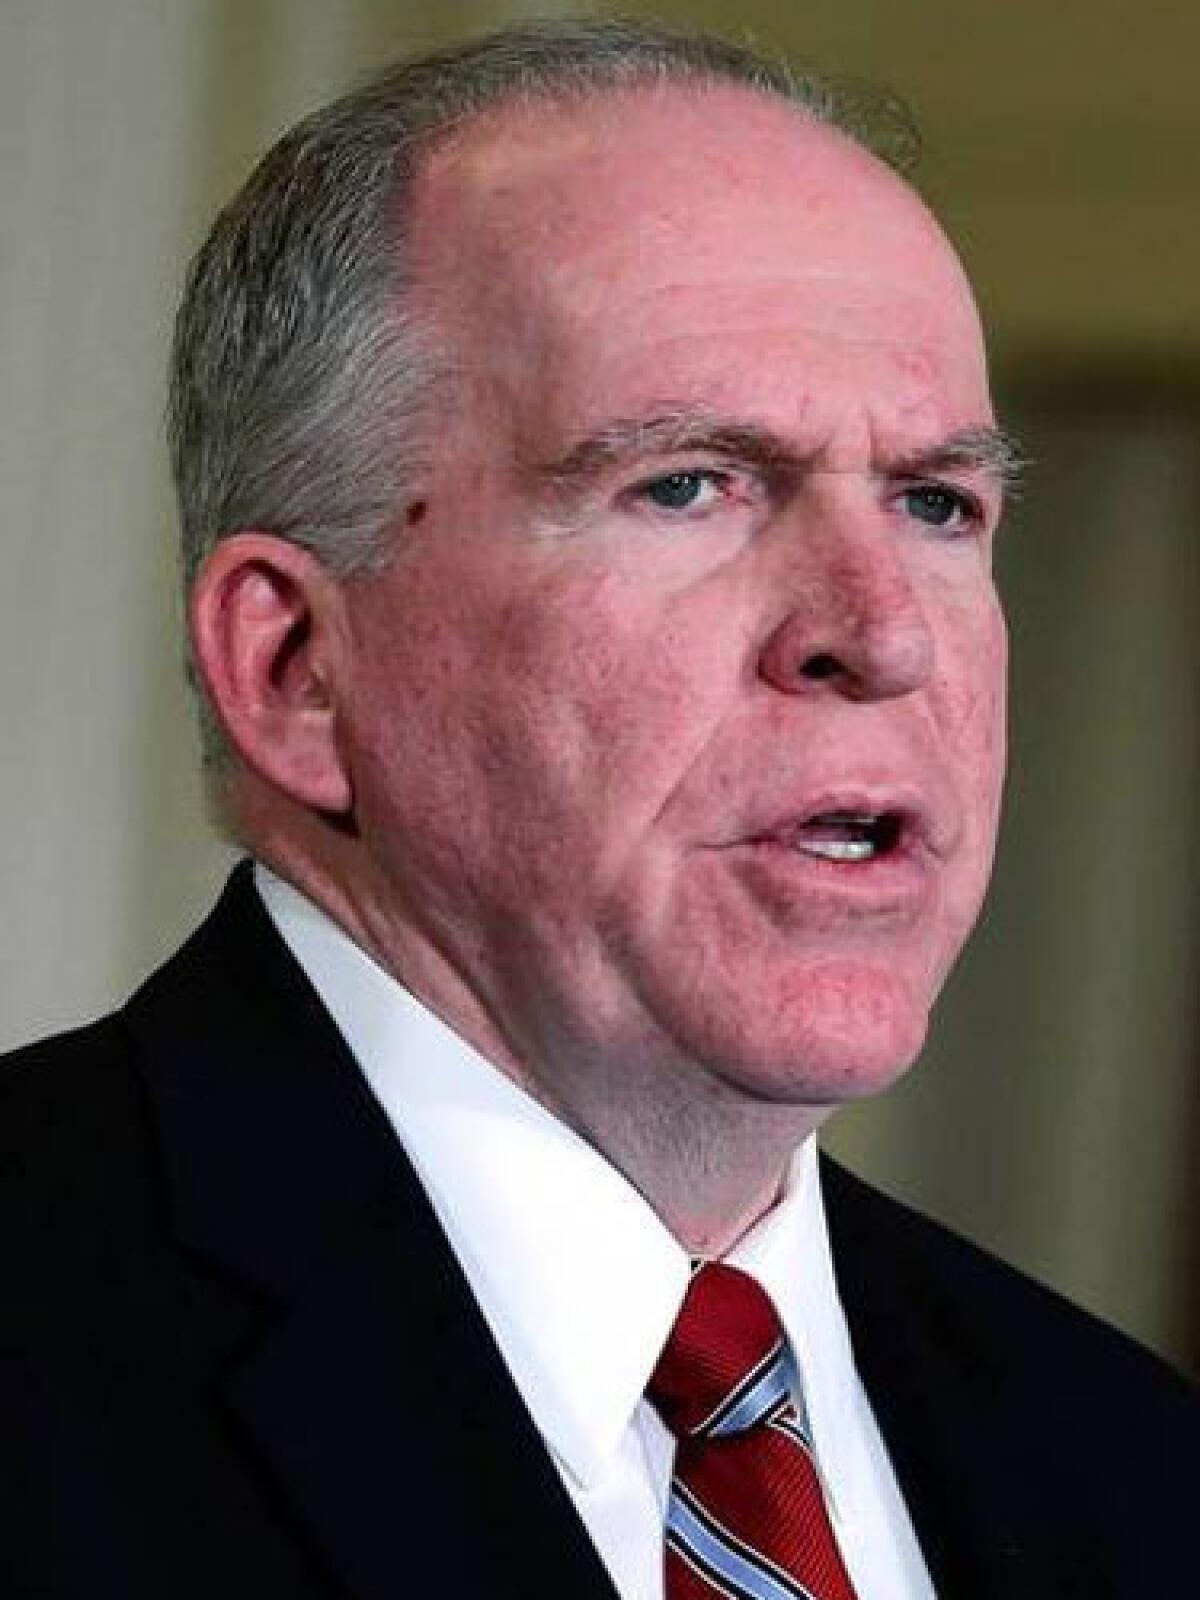 The Senate confirmation process for White House counter-terrorism advisor John Brennan as CIA director has been clouded by lawmakers' complaints about not receiving documents related to a 2011 drone strike in Yemen.